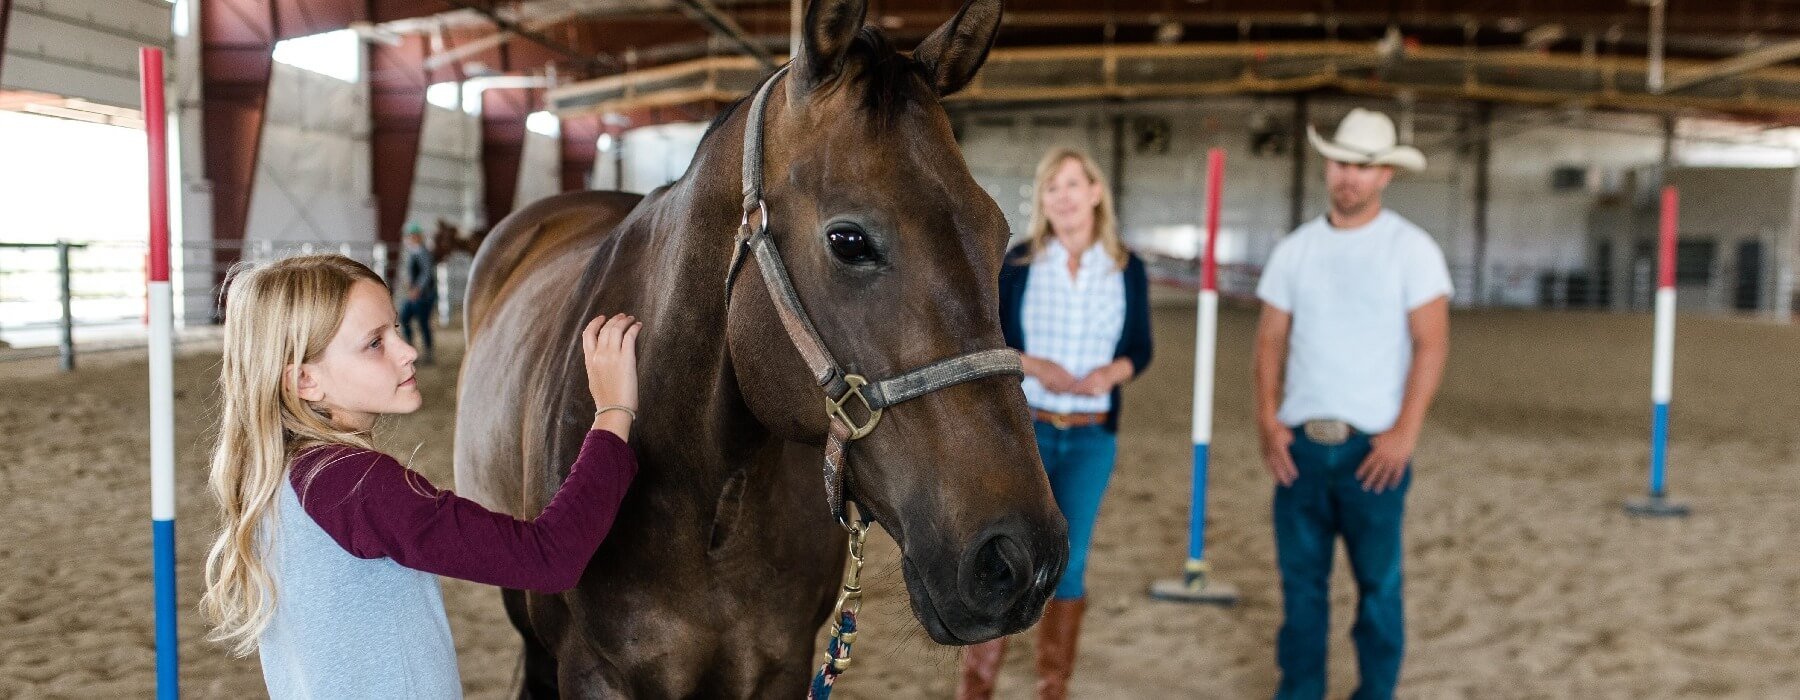 preteen girl in equine therapy session